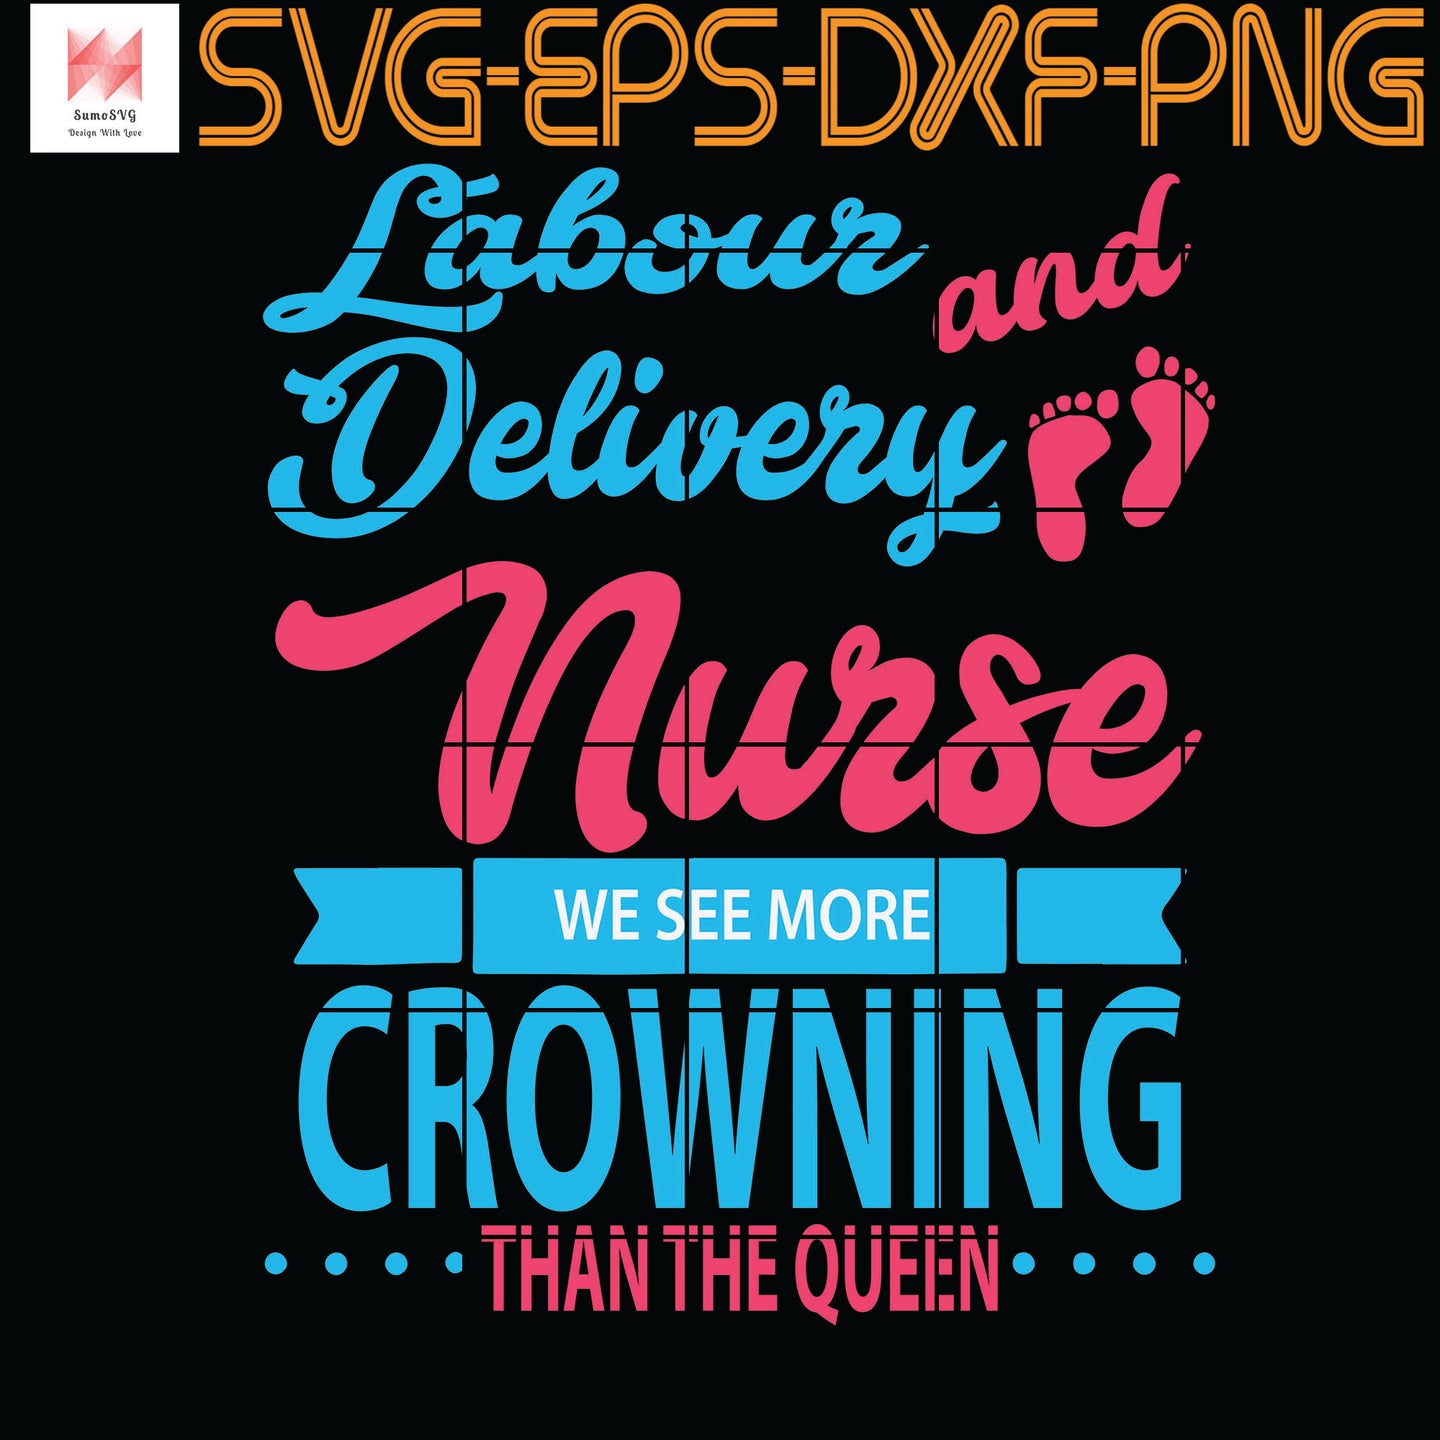 Download Labor And Delivery Nurse We See More Crowning Than The Queen Nursing G Sumosvg